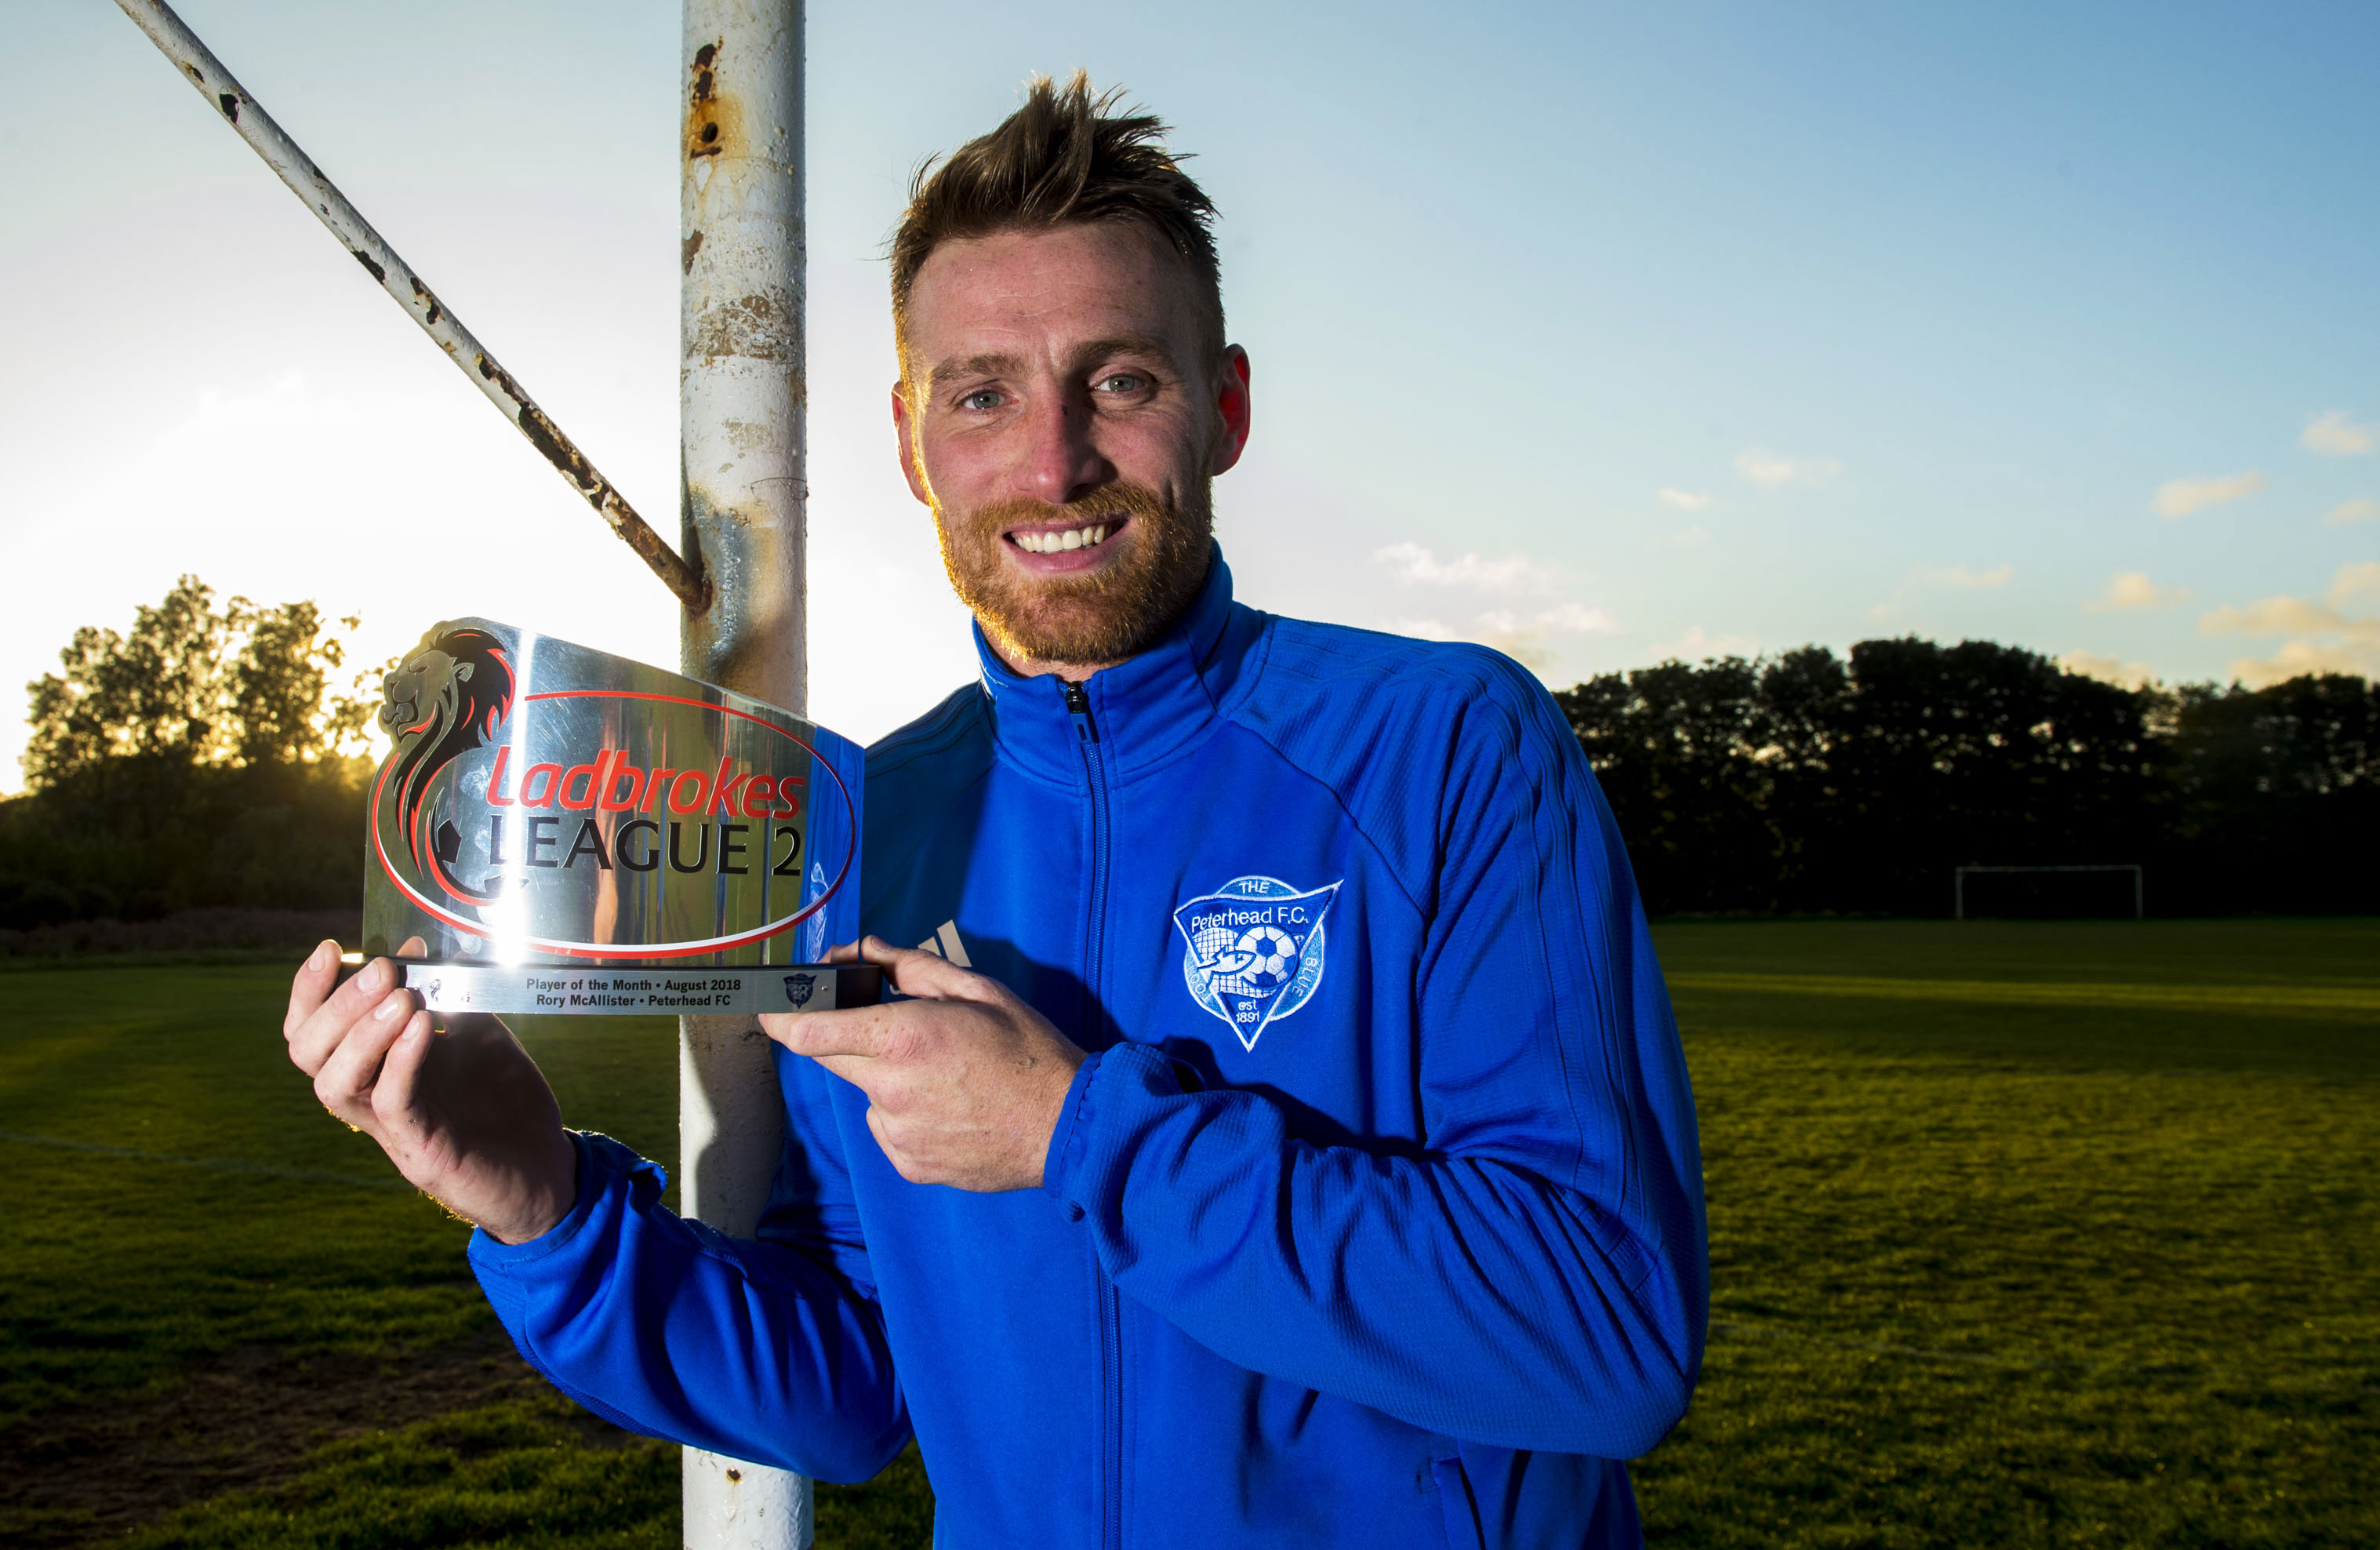 Peterhead forward Rory McAllister with his Ladbrokes League 2 player of the month award for August.